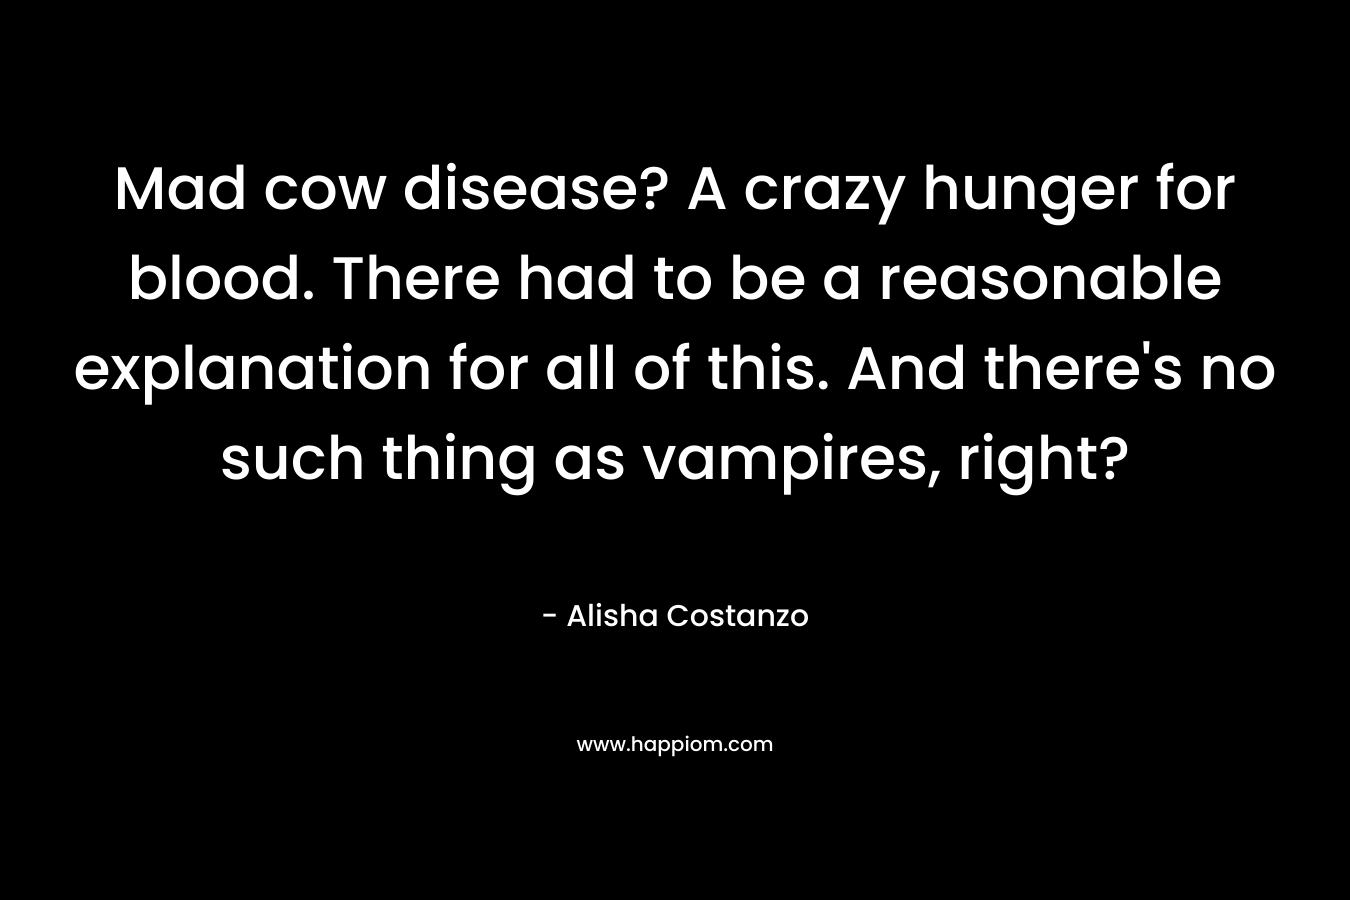 Mad cow disease? A crazy hunger for blood. There had to be a reasonable explanation for all of this. And there’s no such thing as vampires, right? – Alisha Costanzo